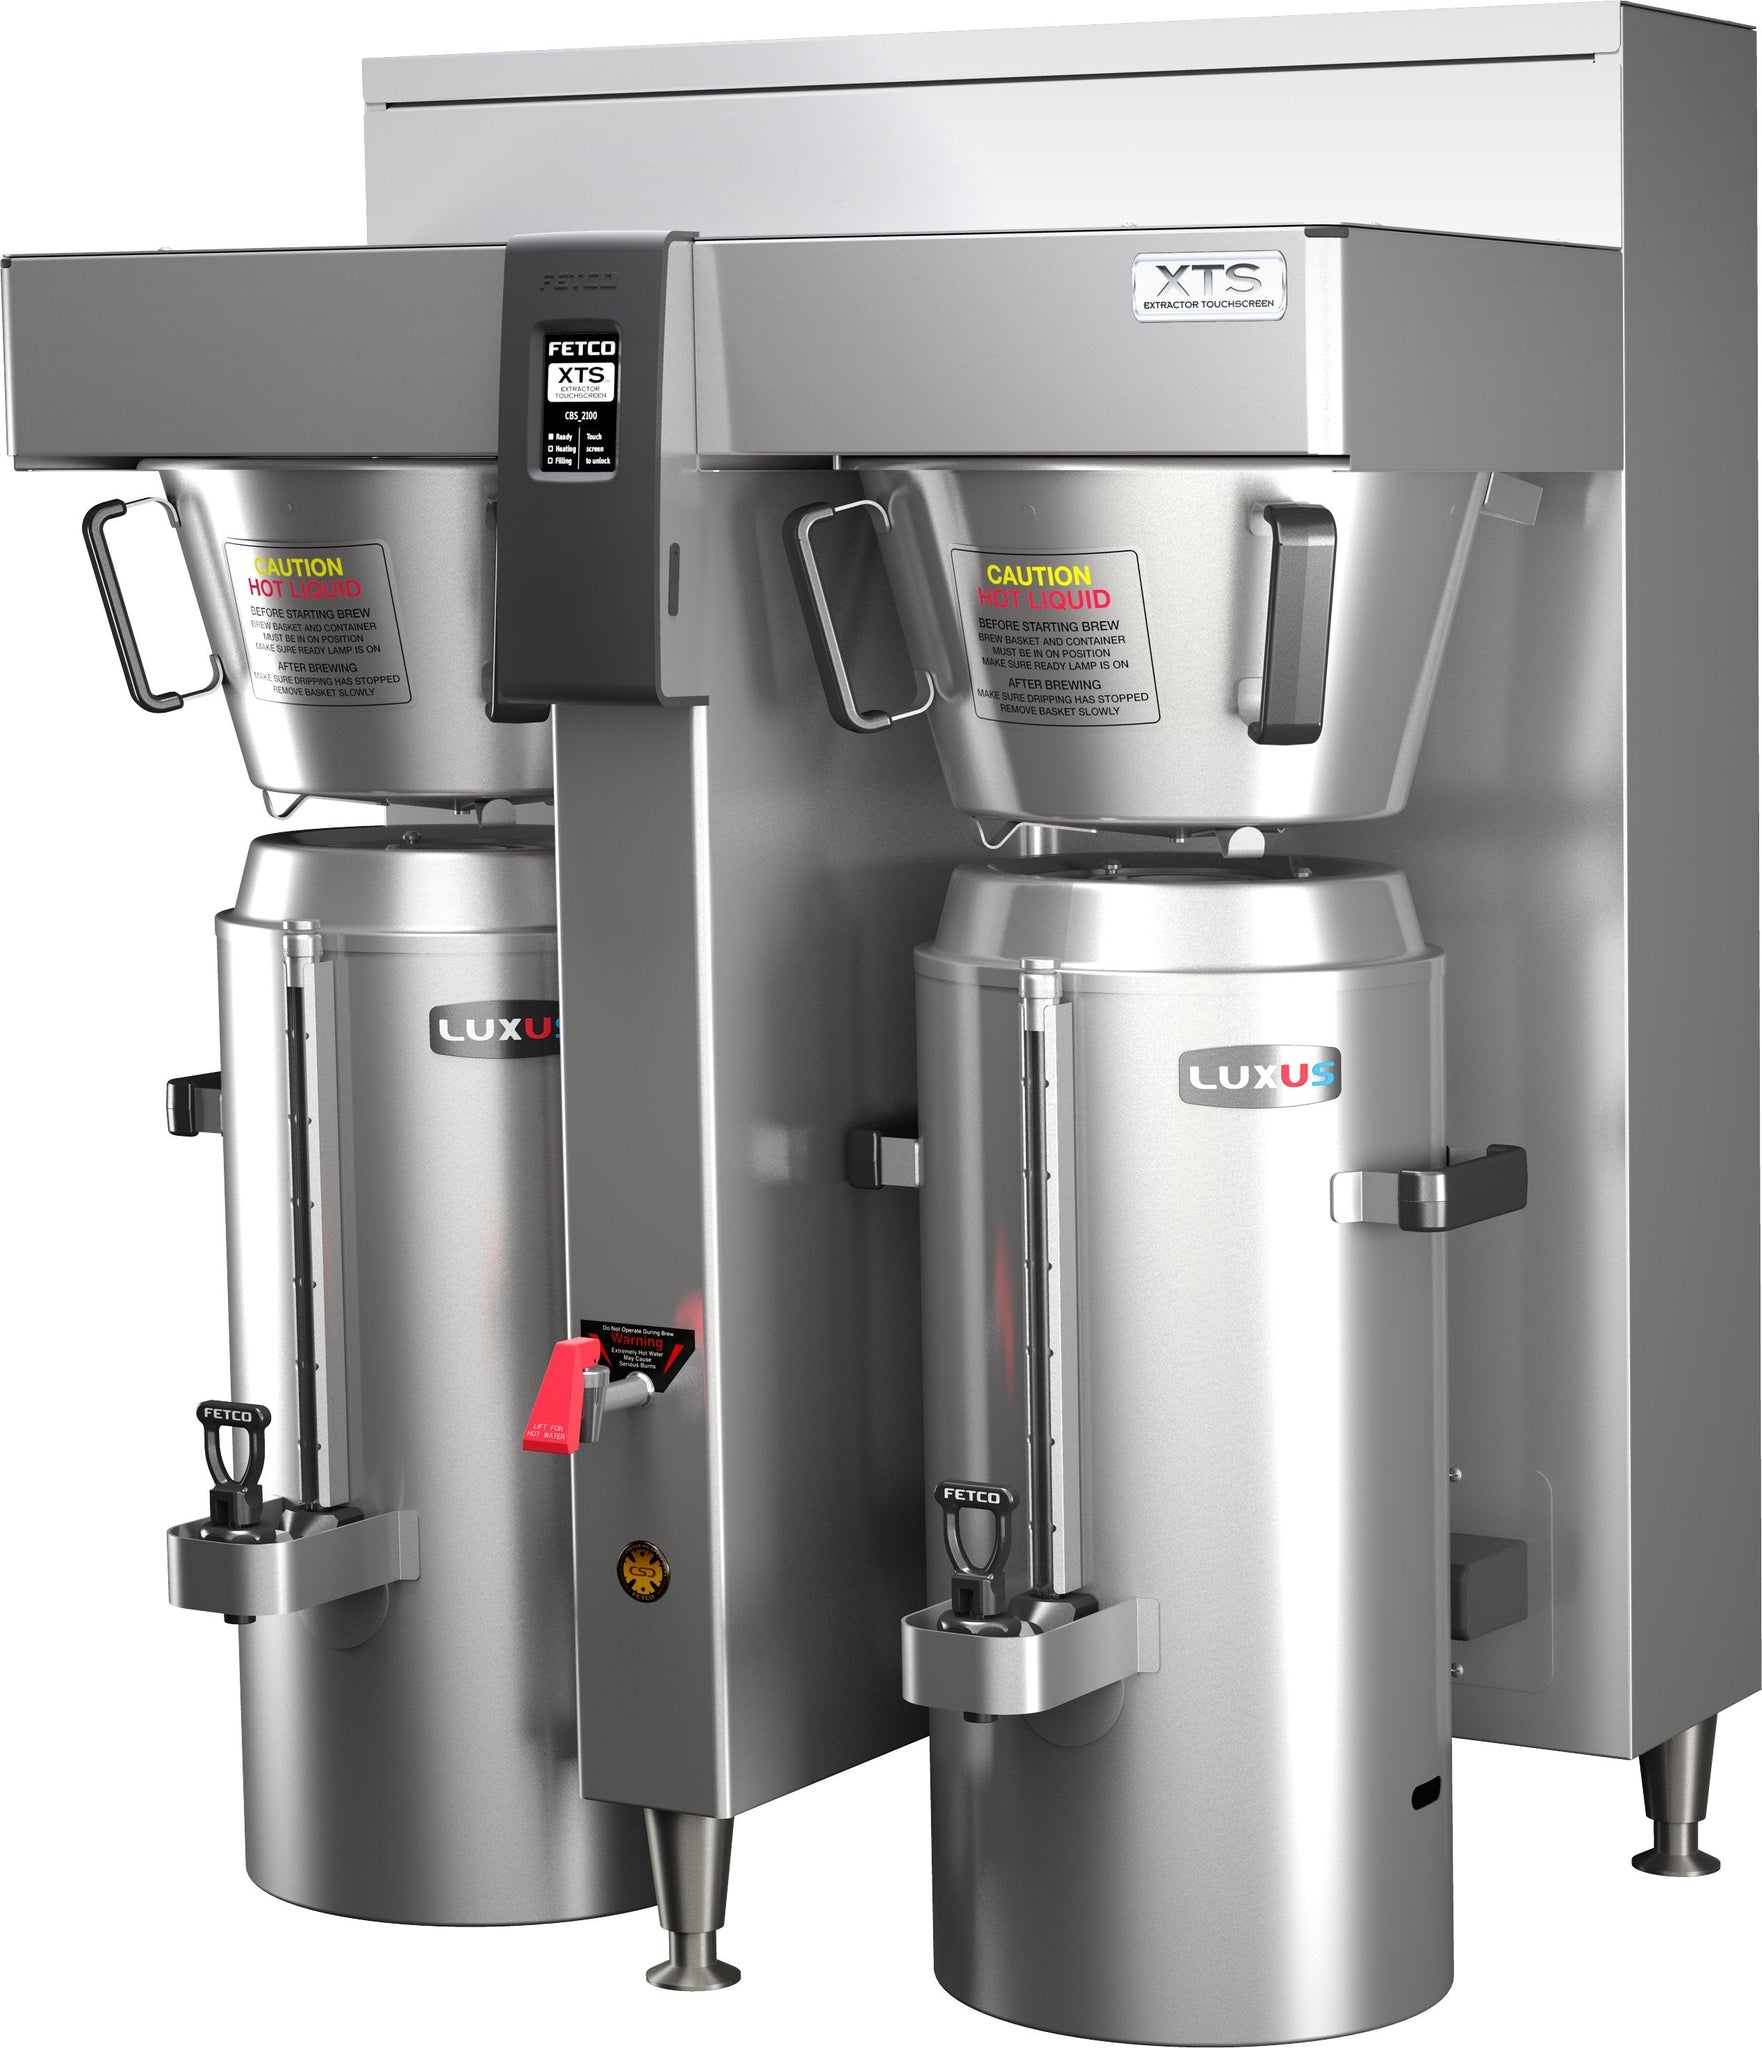 Fetco - Touchscreen Series Coffee Brewer Double Station 3 x 4 kW 200-240V - CBS-2162XTS